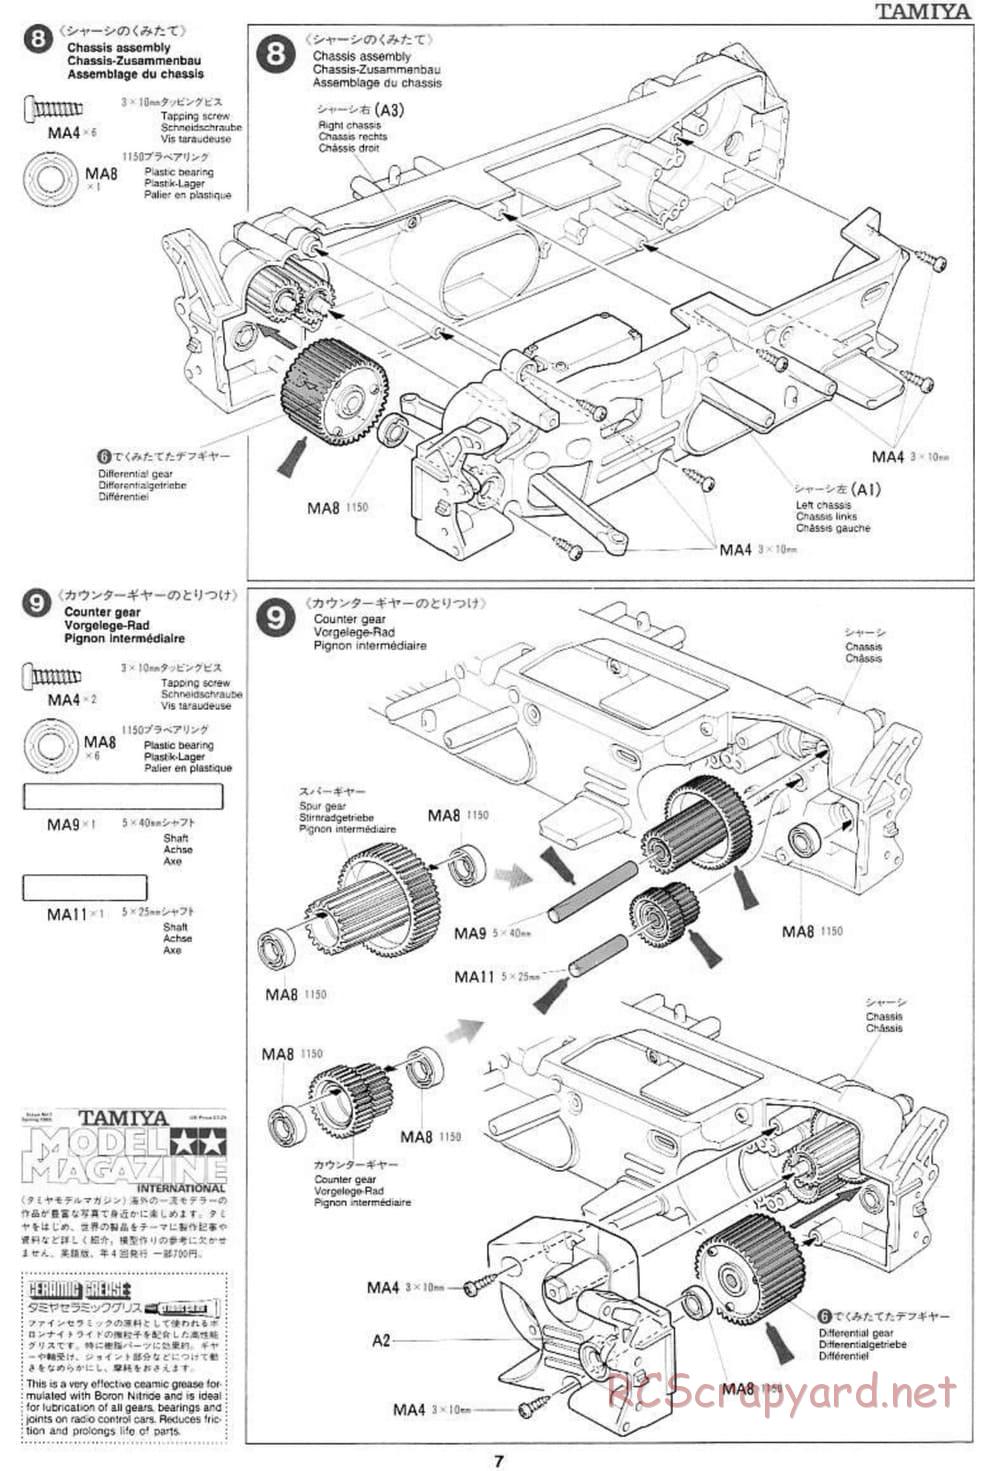 Tamiya - Pennzoil Nismo GT-R - TL-01 Chassis - Manual - Page 7